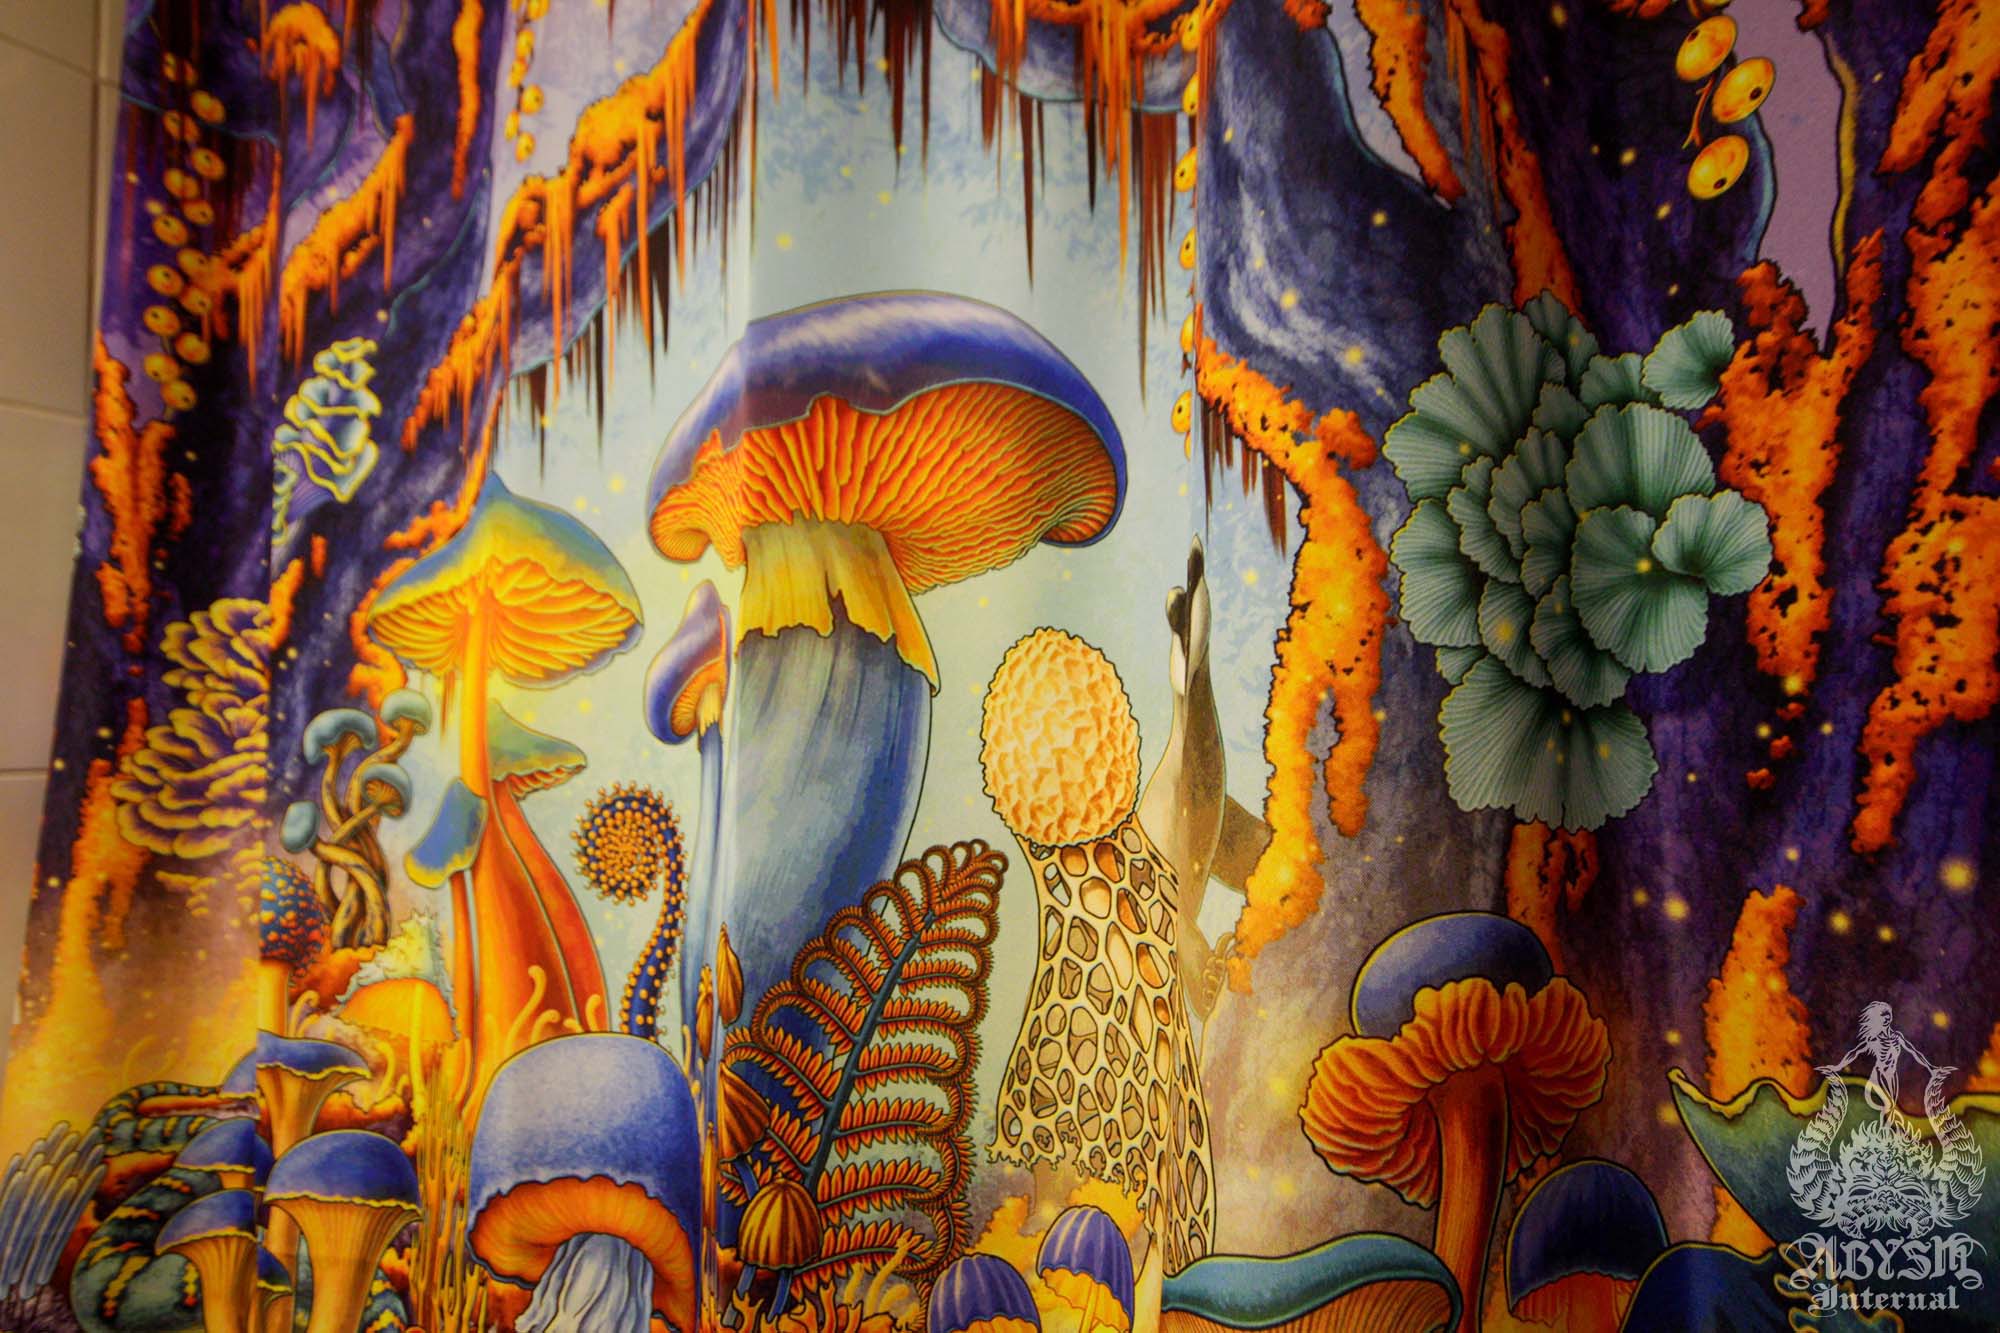 Abysm Internal - Magic Forest, Gold and Blue Mushroom Shower Curtain Sample